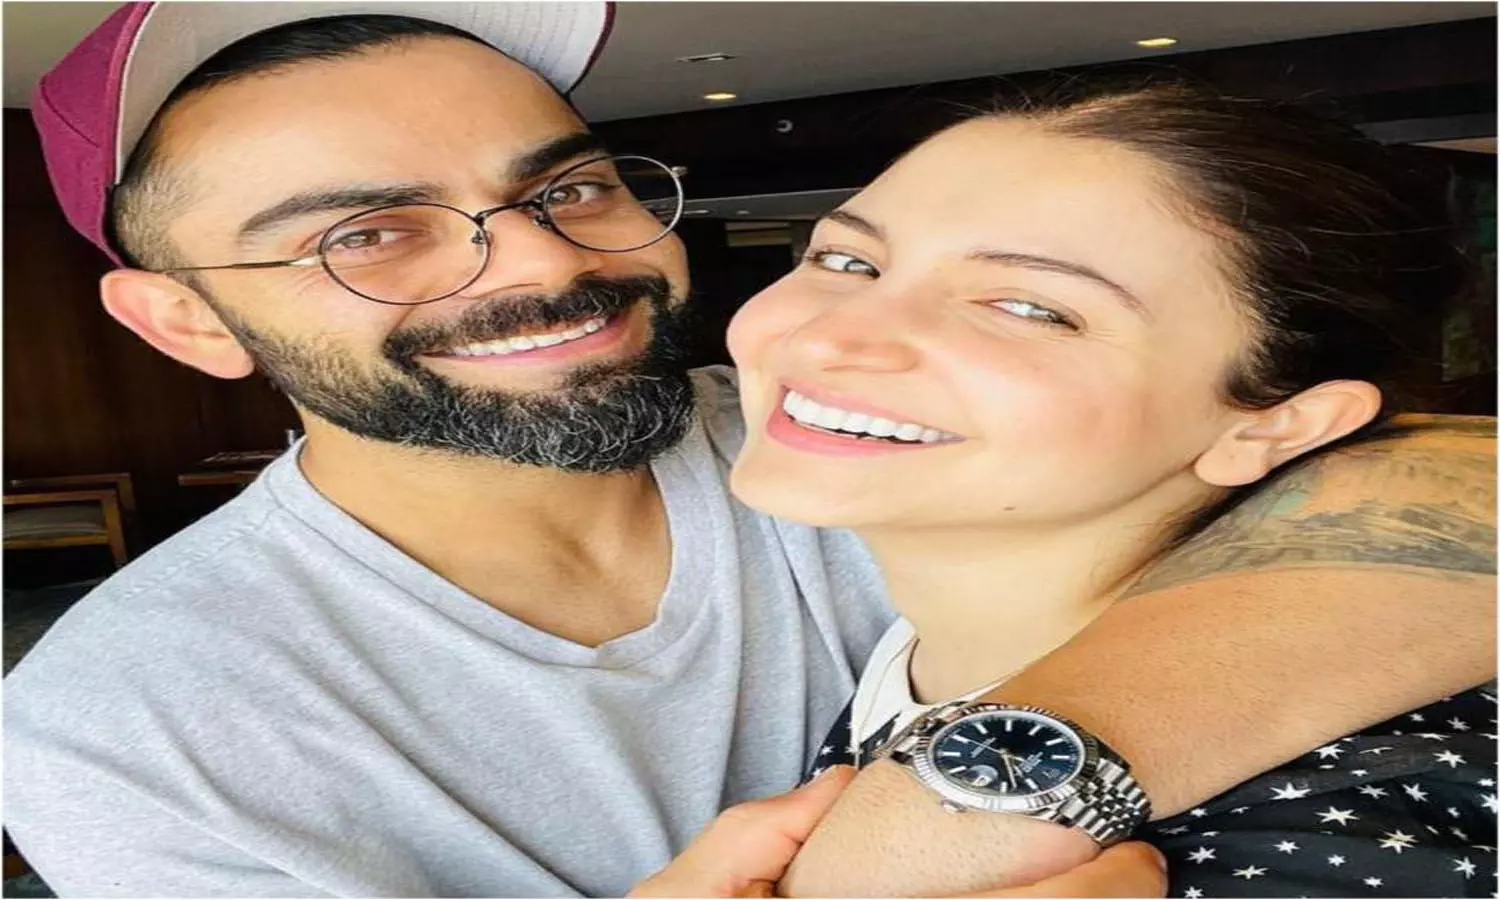 Anushka-Virat start COVID-19 fundraiser, urge all to help: It pains us to see our country suffer